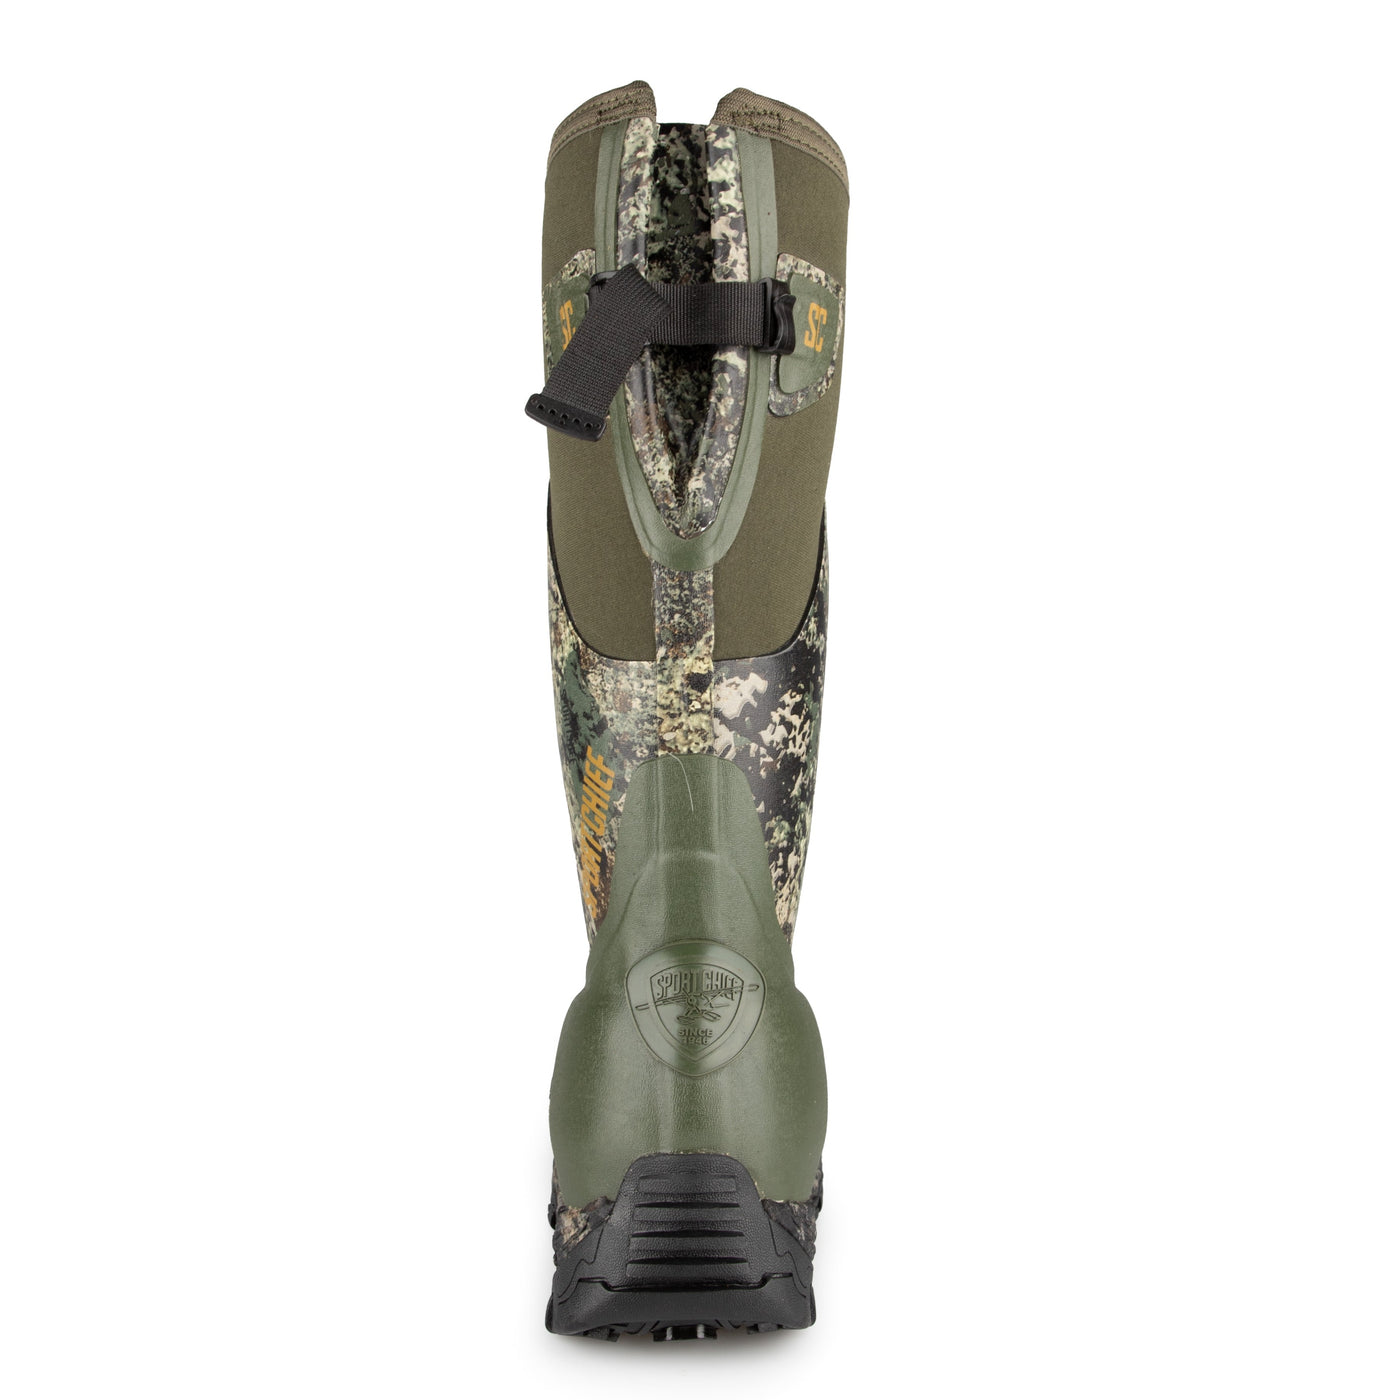 SPORTCHIEF "Rush 3" camo The Ripper men's hunting rubber boots